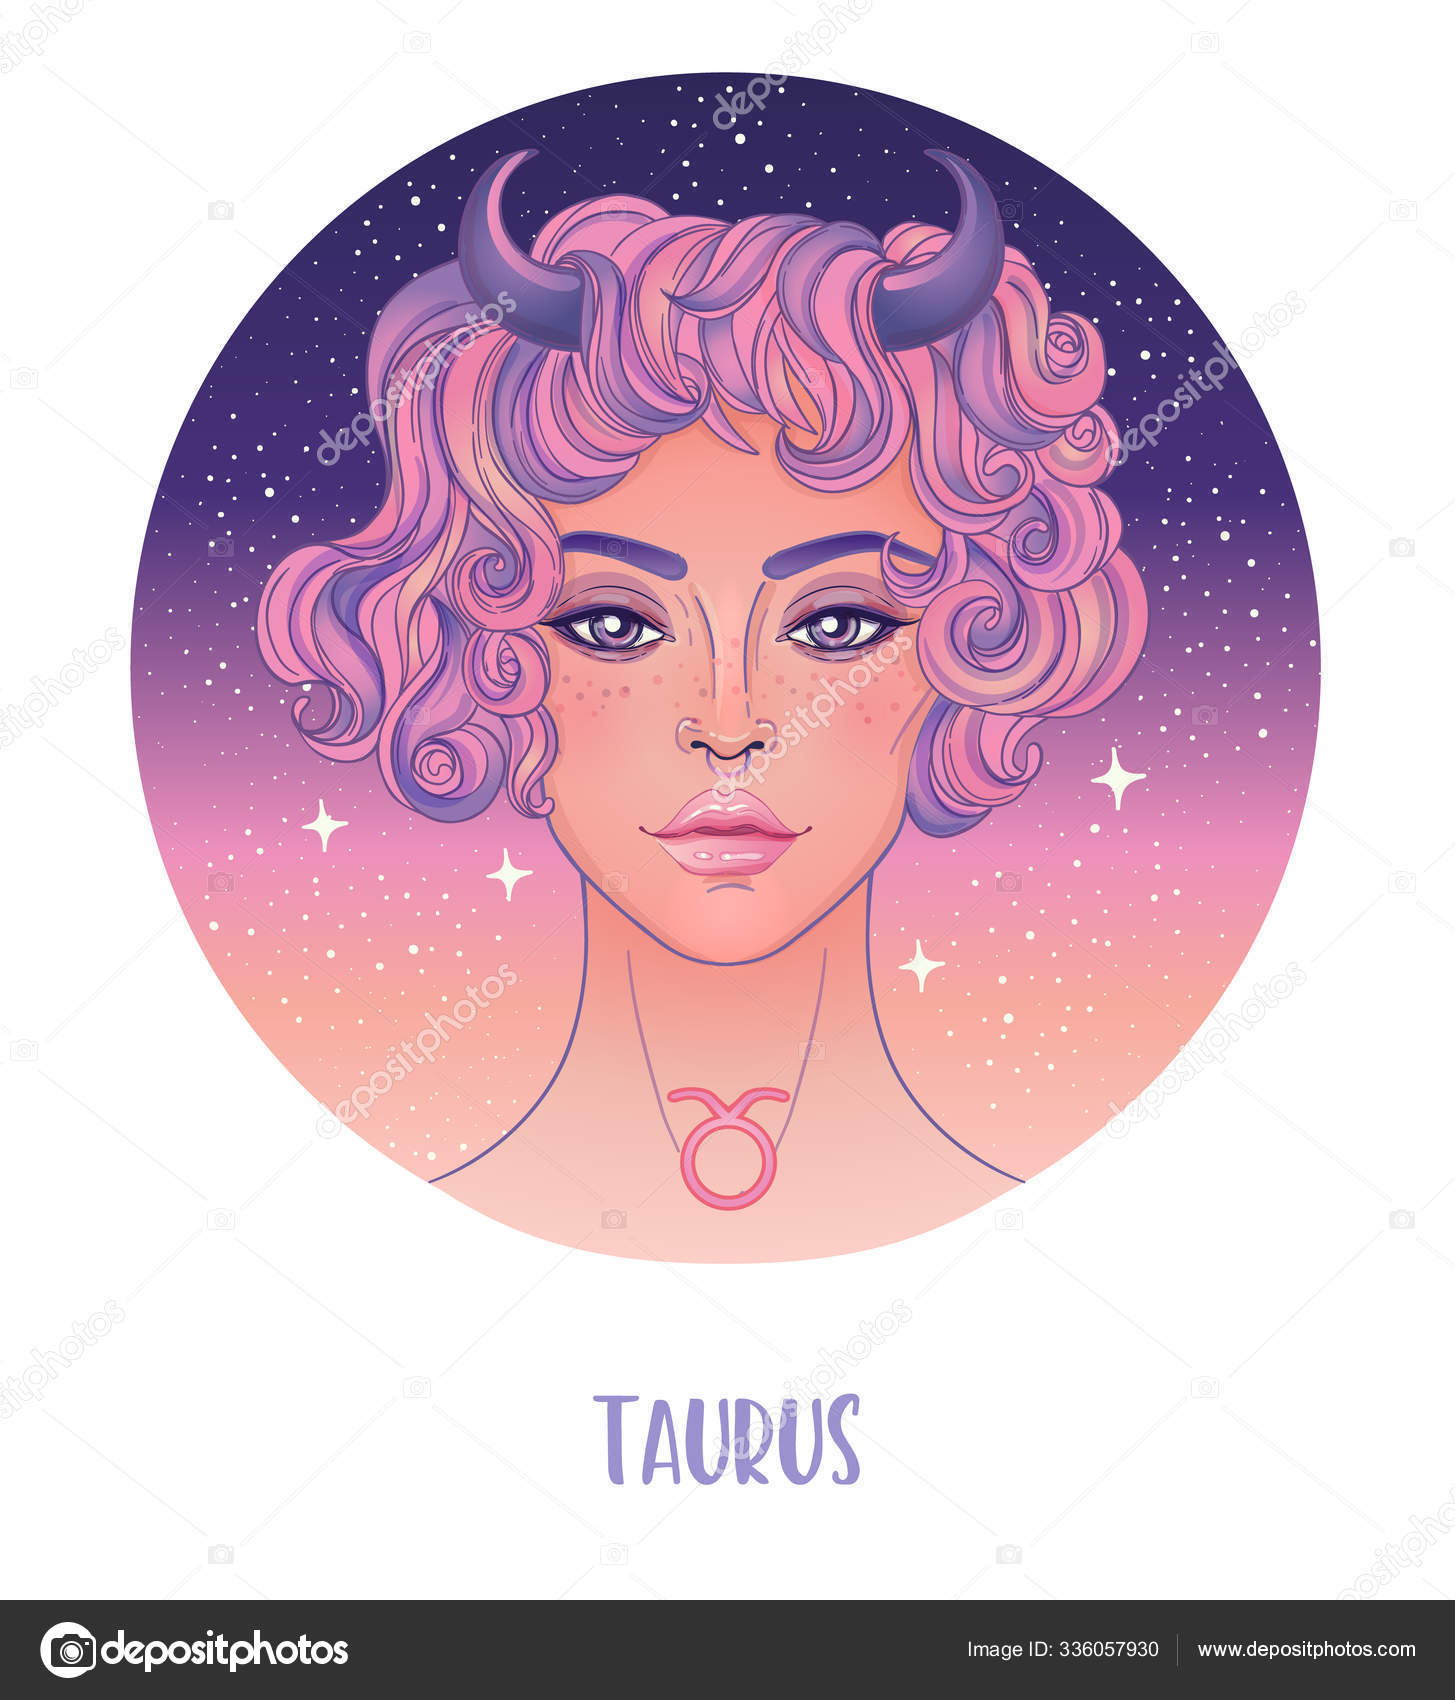 Images Of Taurus Zodiac Sign